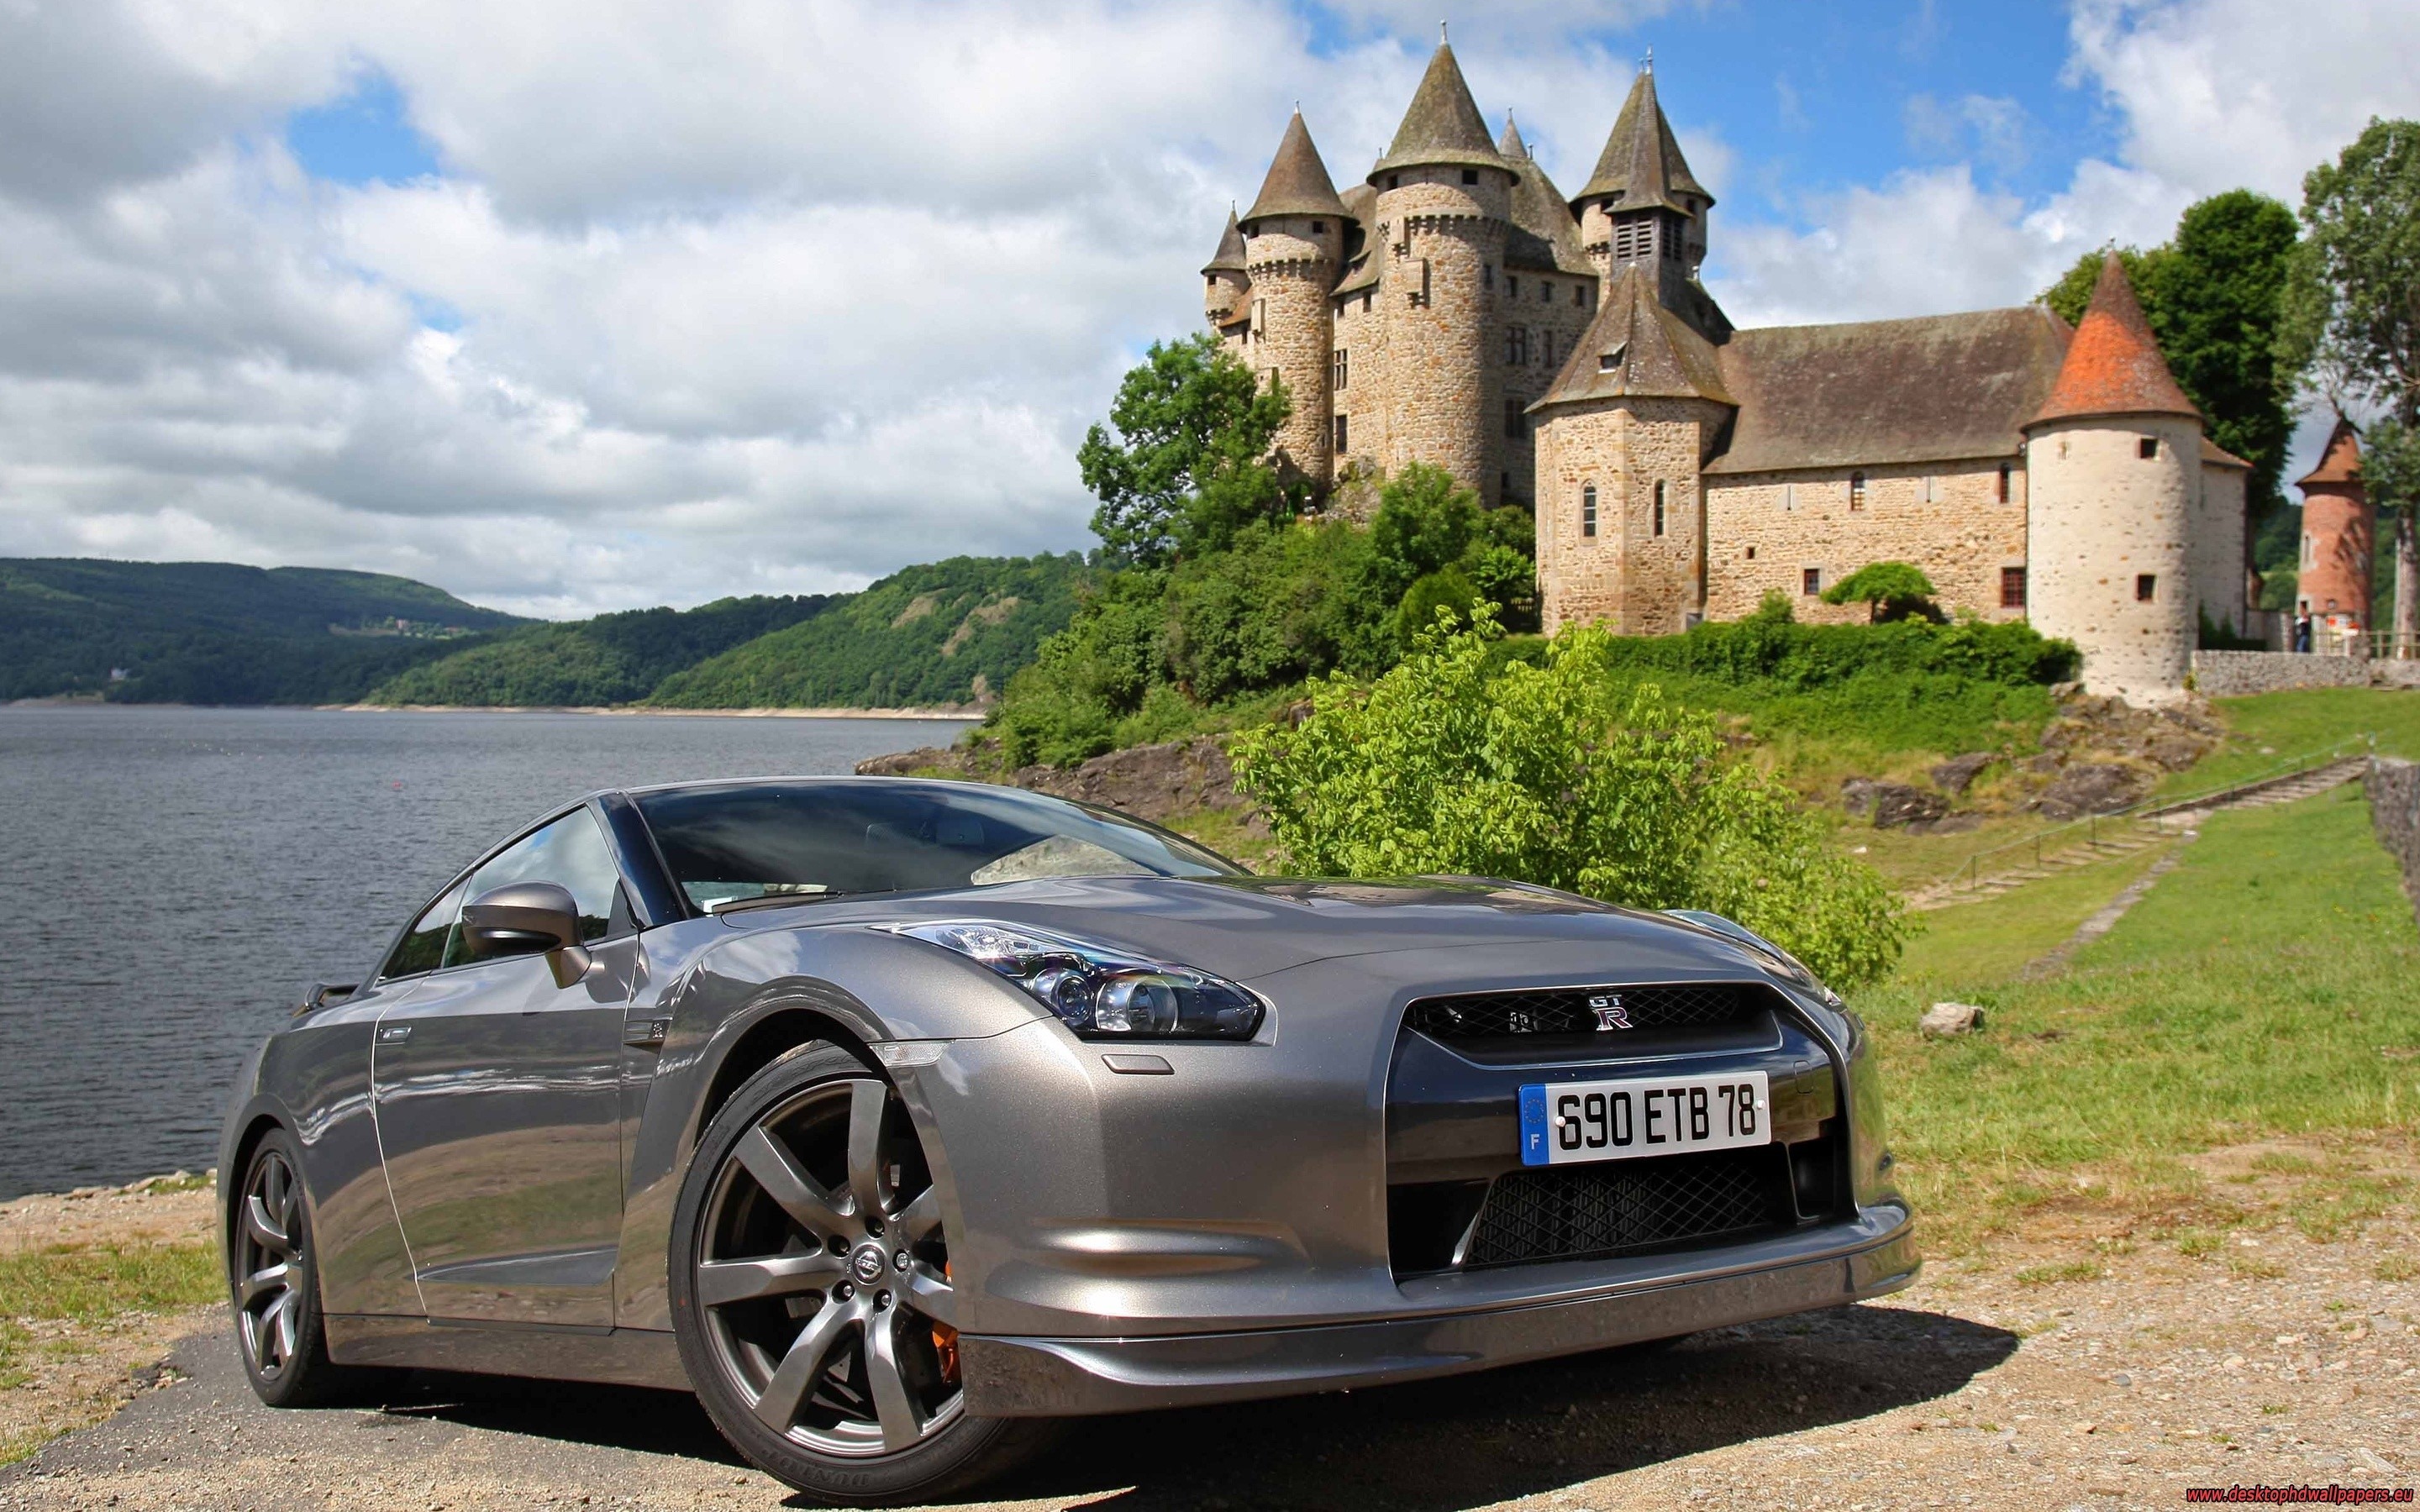 General 2880x1800 Nissan GT-R car Nissan numbers building vehicle silver cars Japanese cars frontal view closeup watermarked water clouds sky trees sunlight grass